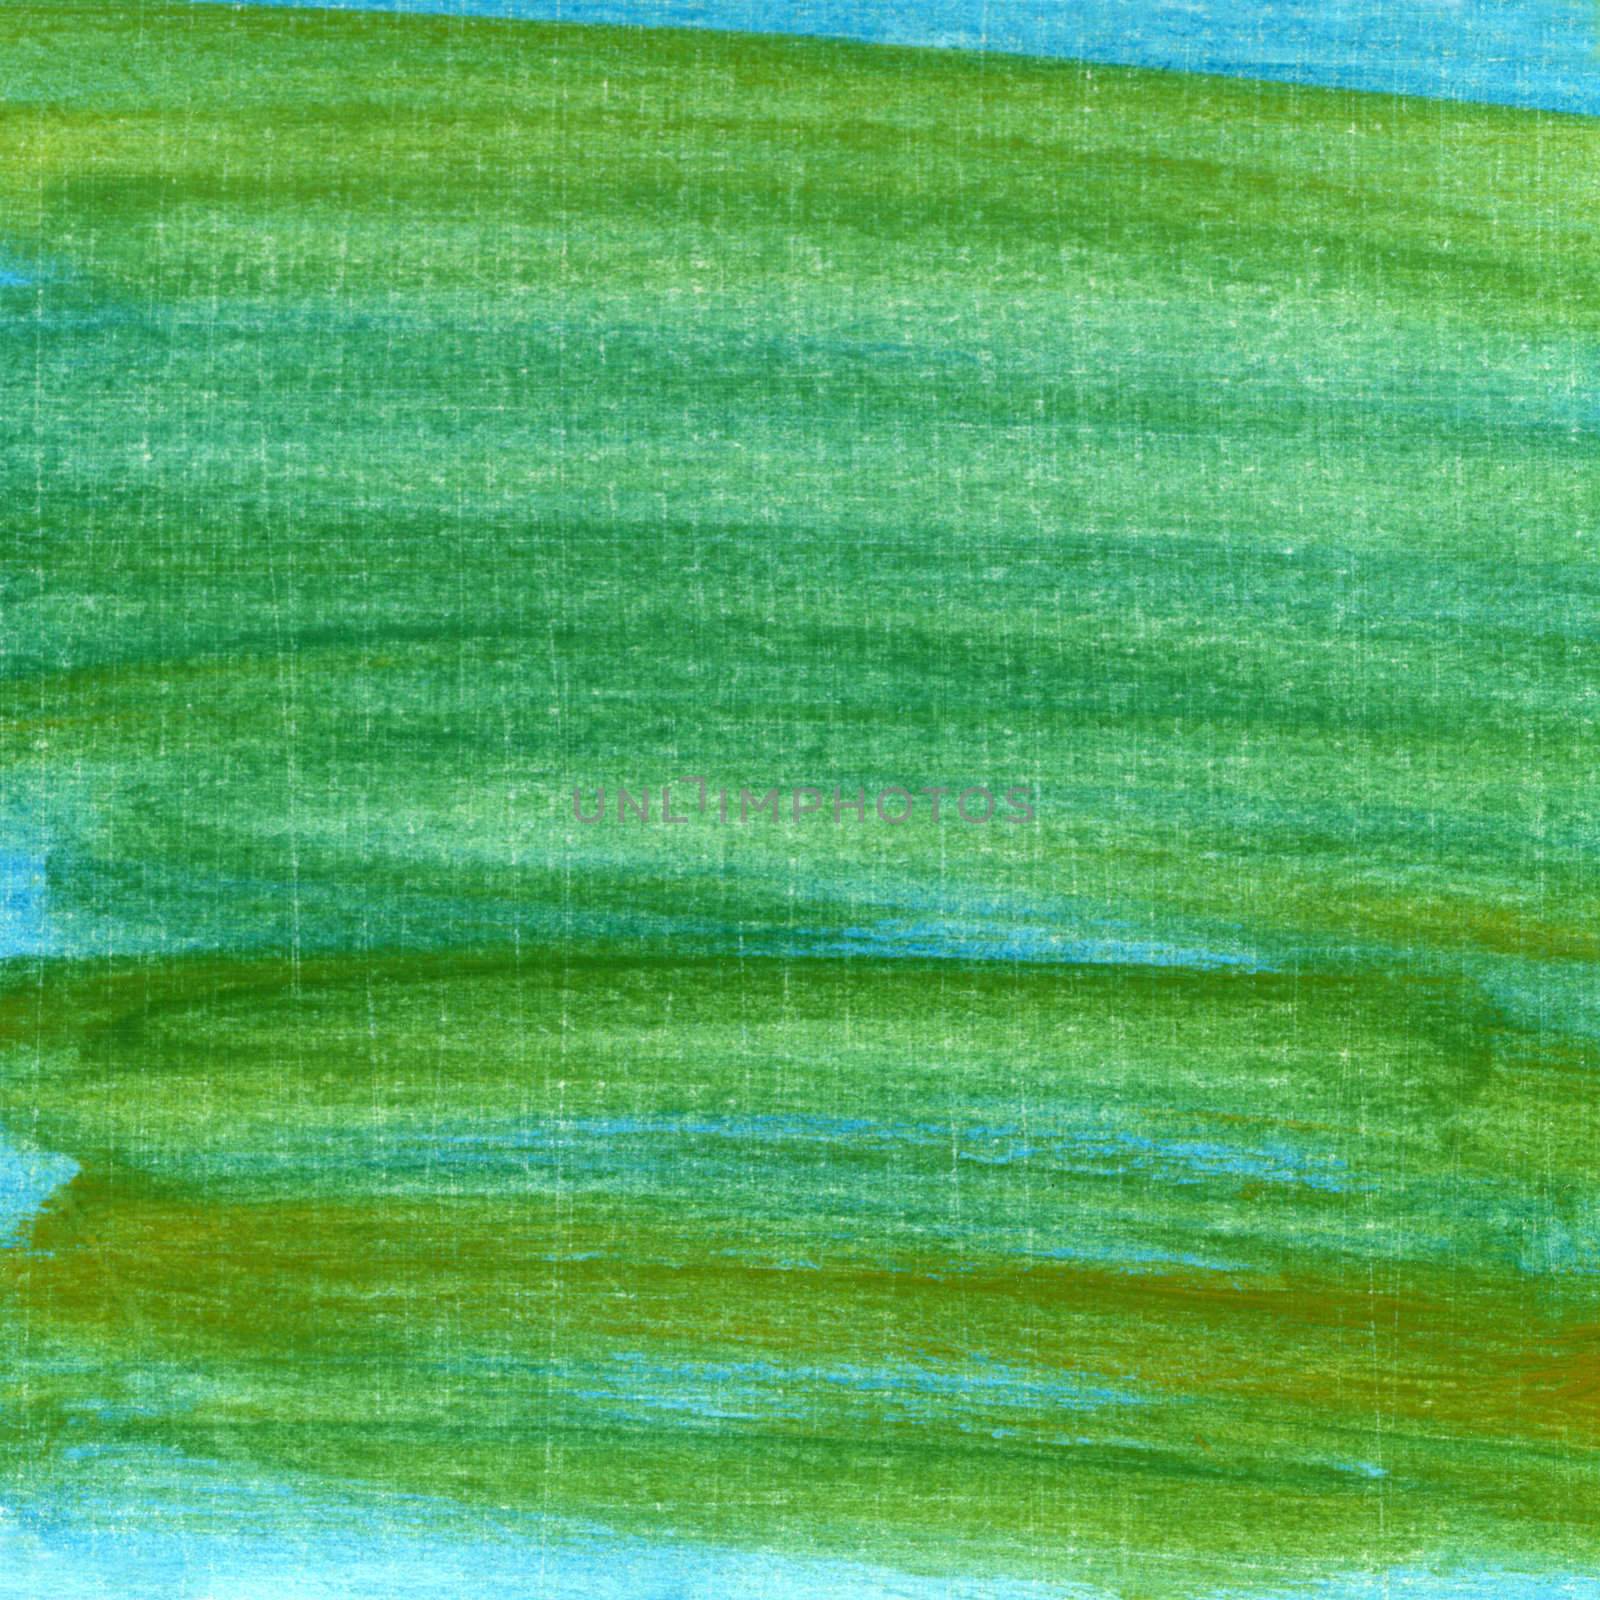 green and blue grunge painted scratched background by PixelsAway